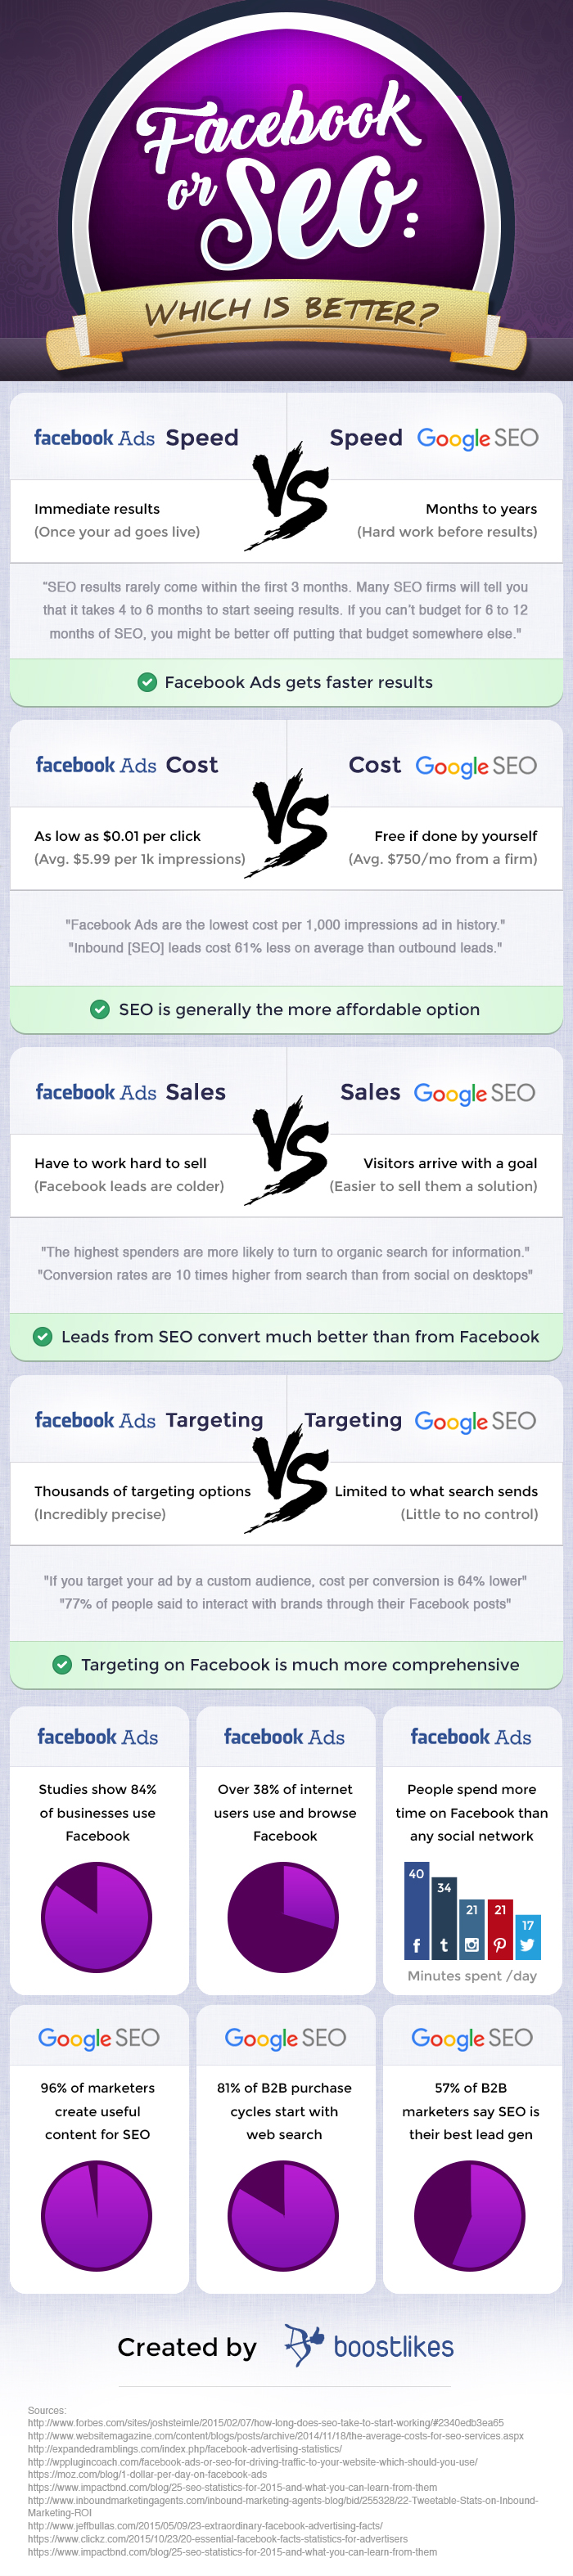 Facebook or SEO: Which is Better? [Infographic]